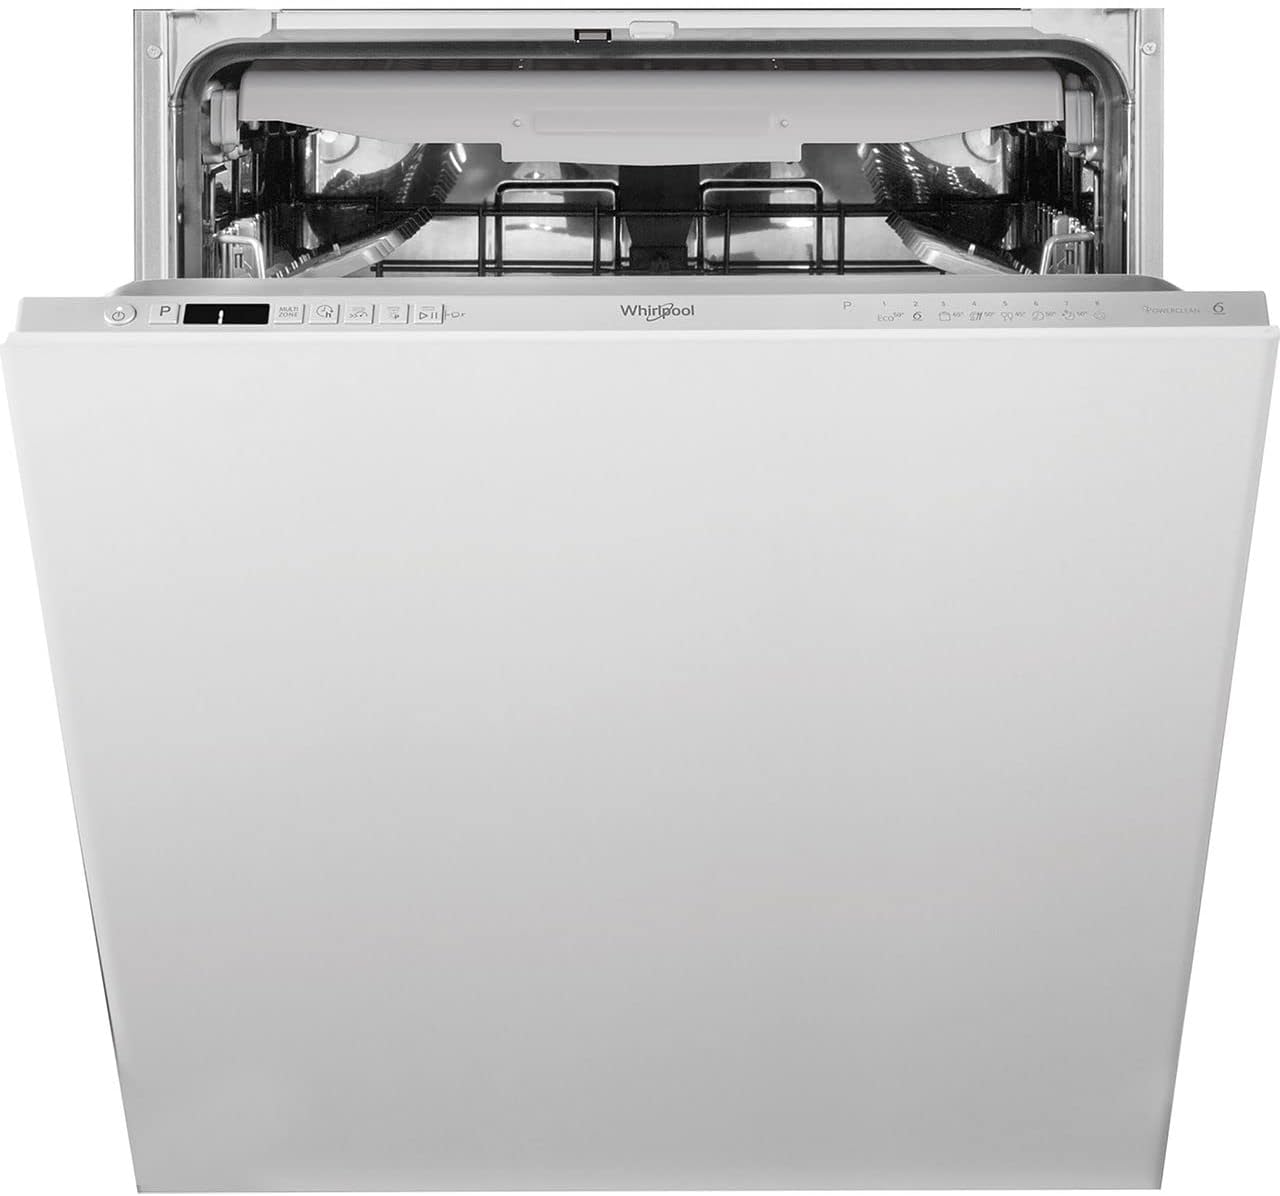 Whirlpool WIC3C33PFEUK Fully Integrated Standard Dishwasher - Silver Control Panel with Fixed Door Fixing Kit - D Rated - Amazing Gadgets Outlet